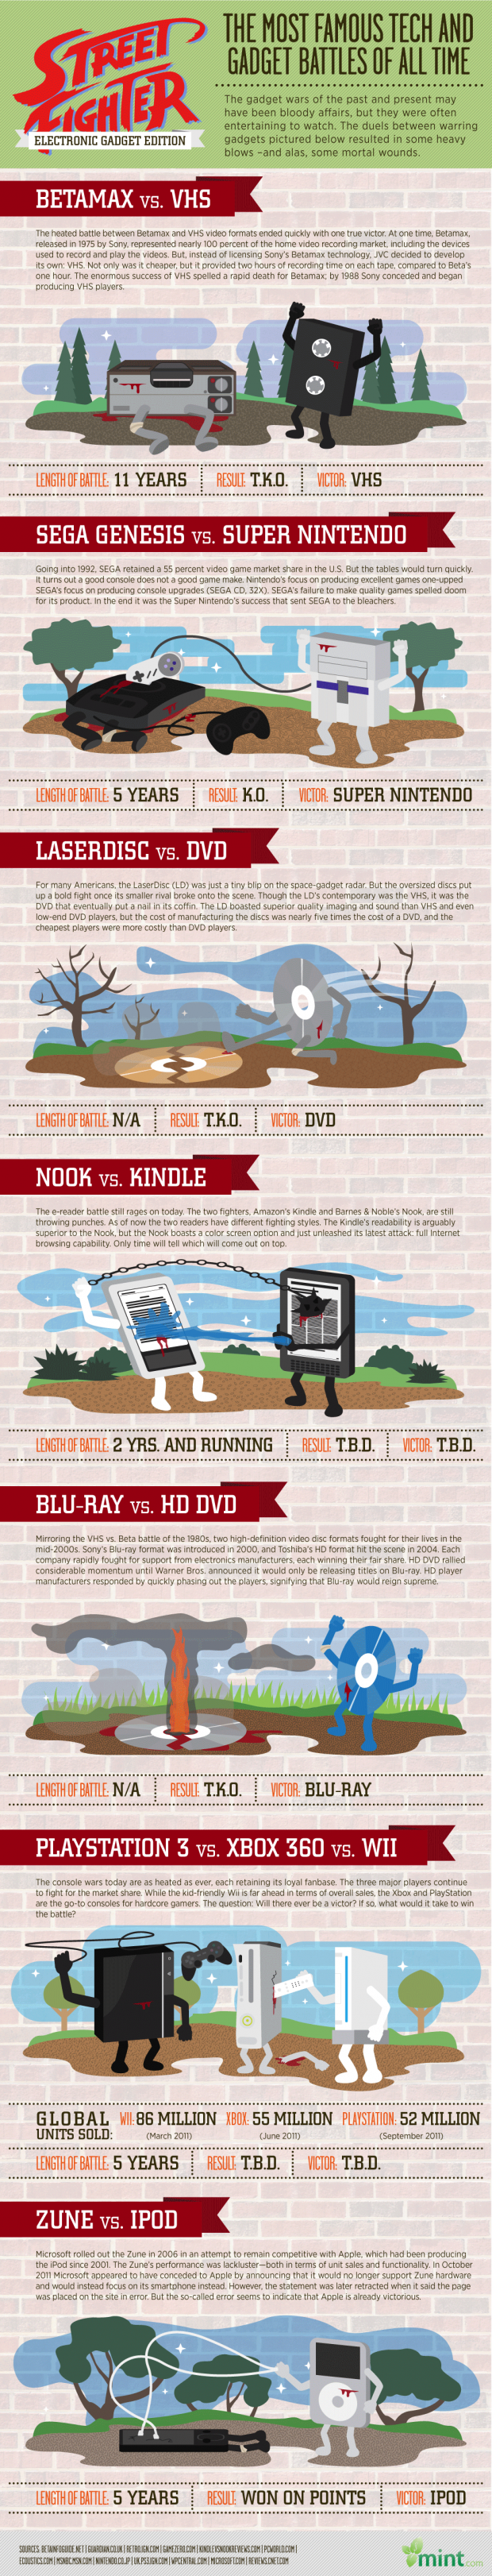 Most Famous Tech Battles of All Time [Infographic]